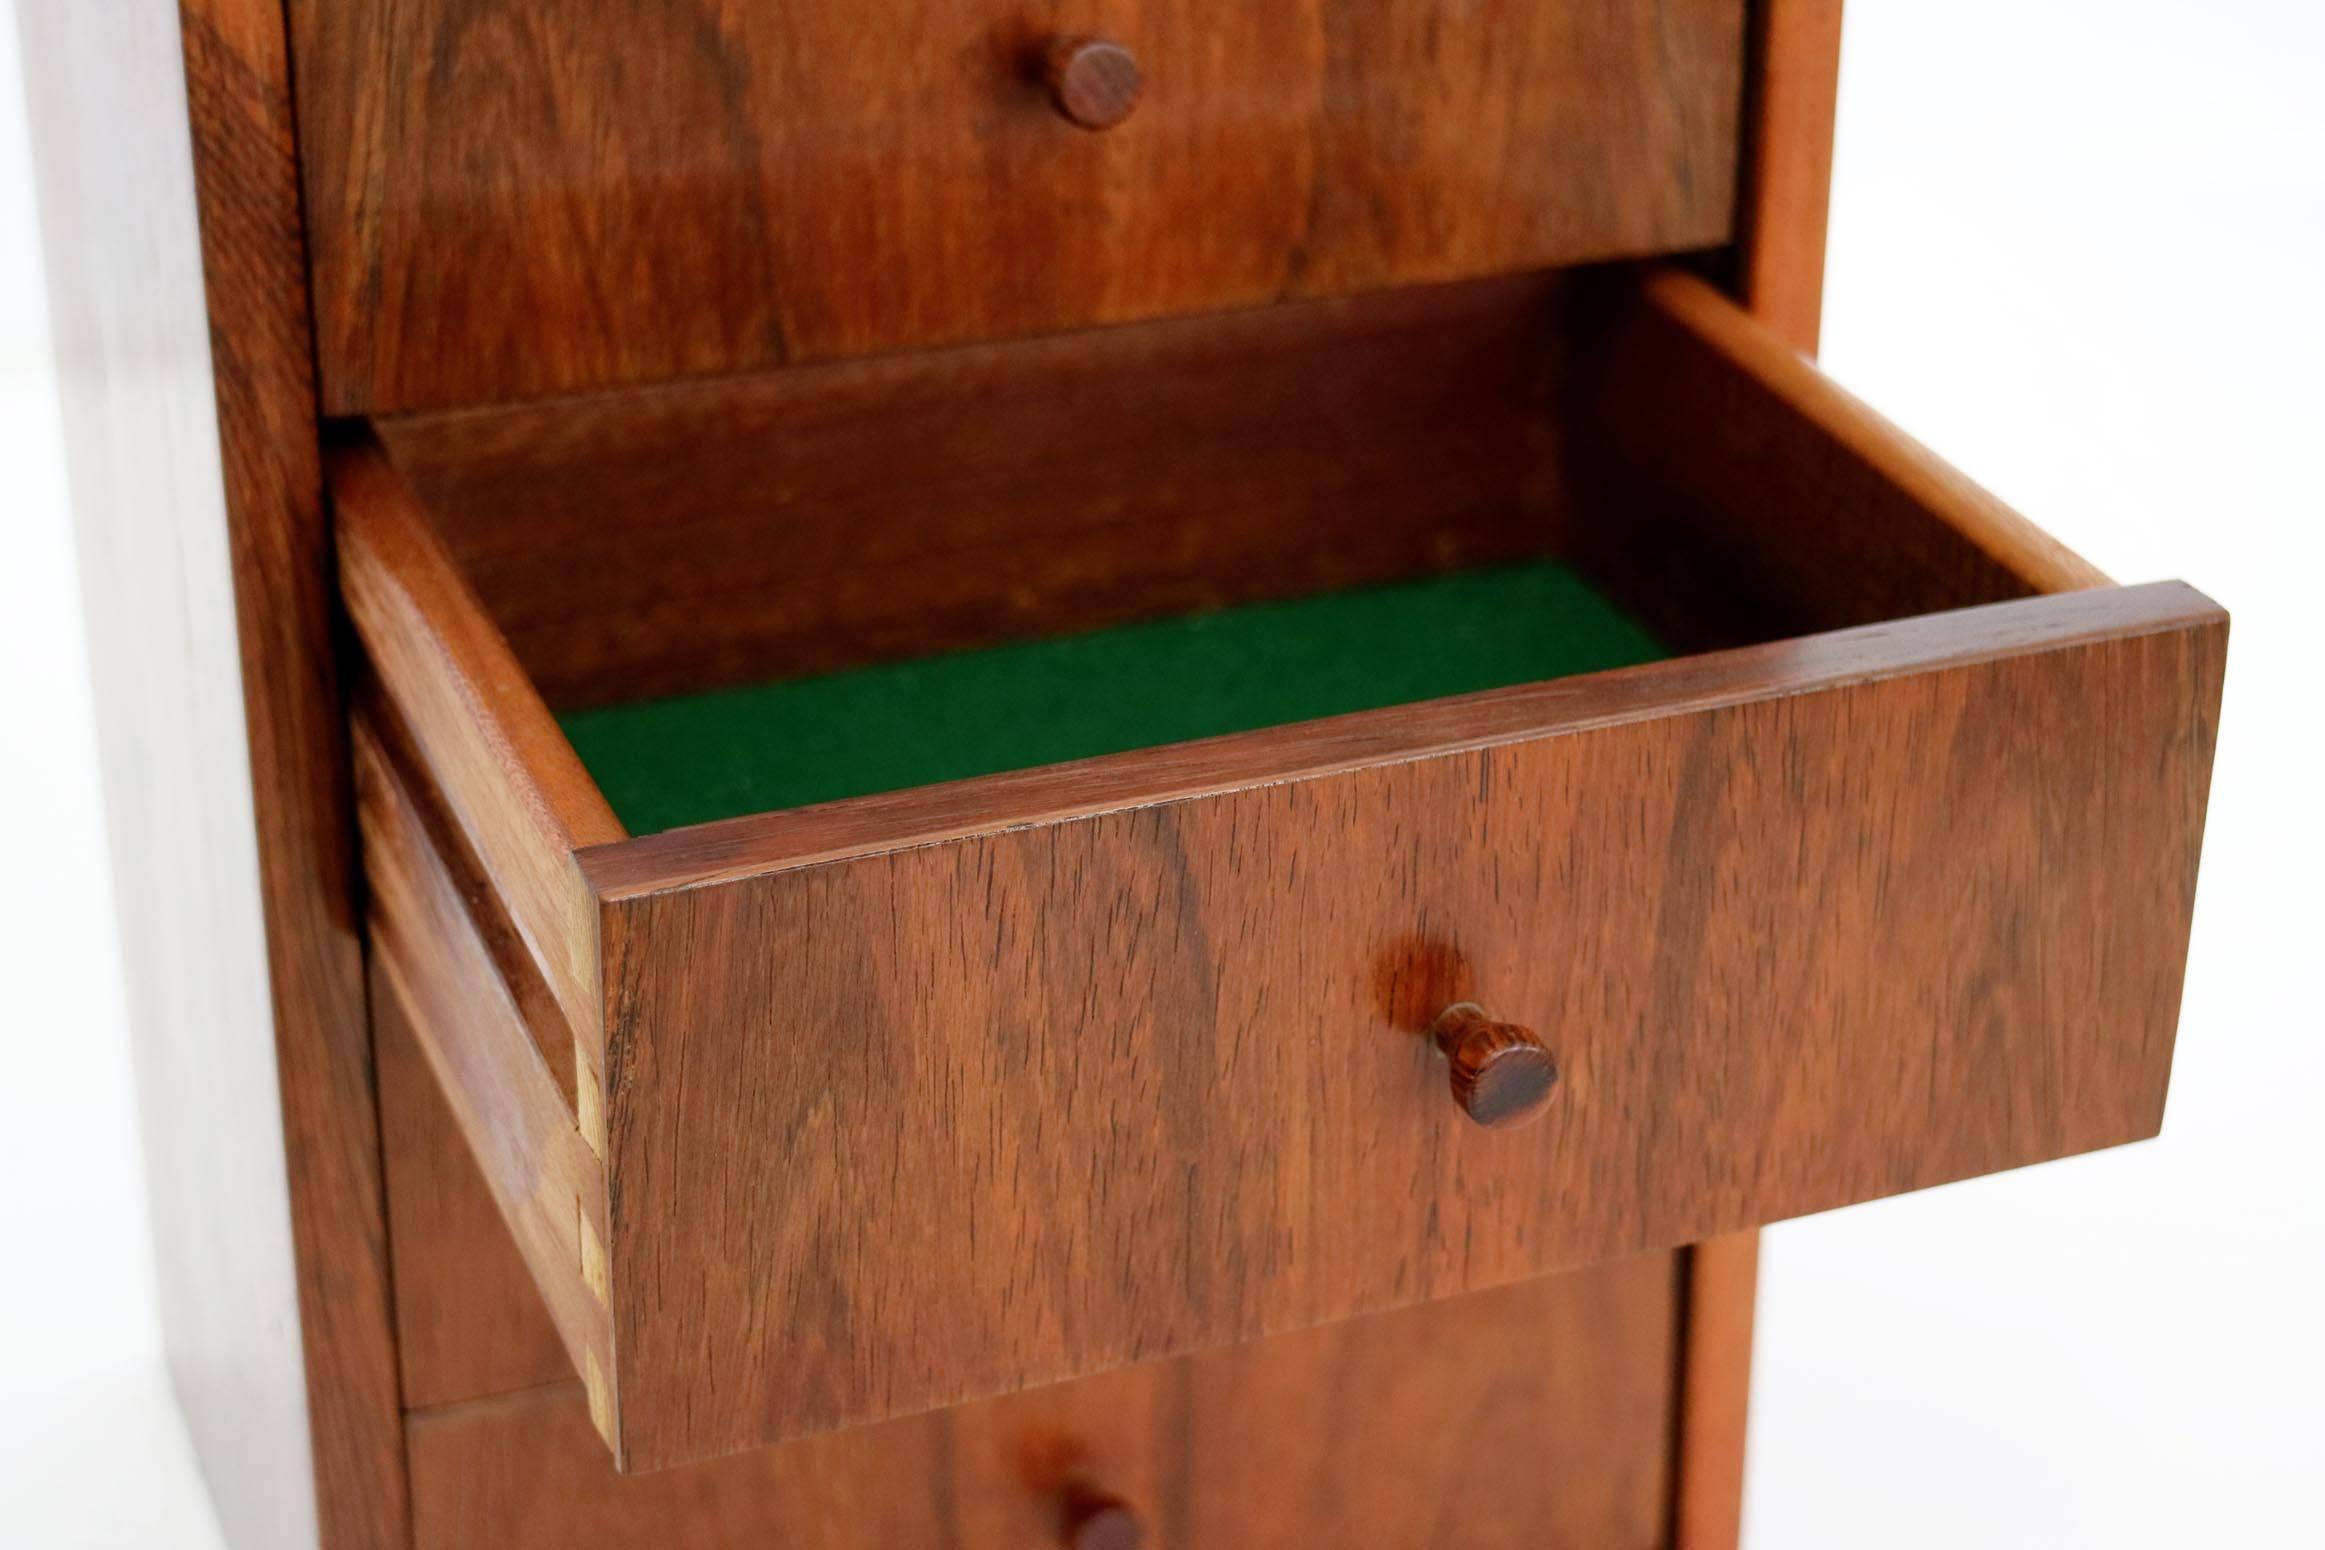 4 Green lined felt drawers and oiled teak wood.